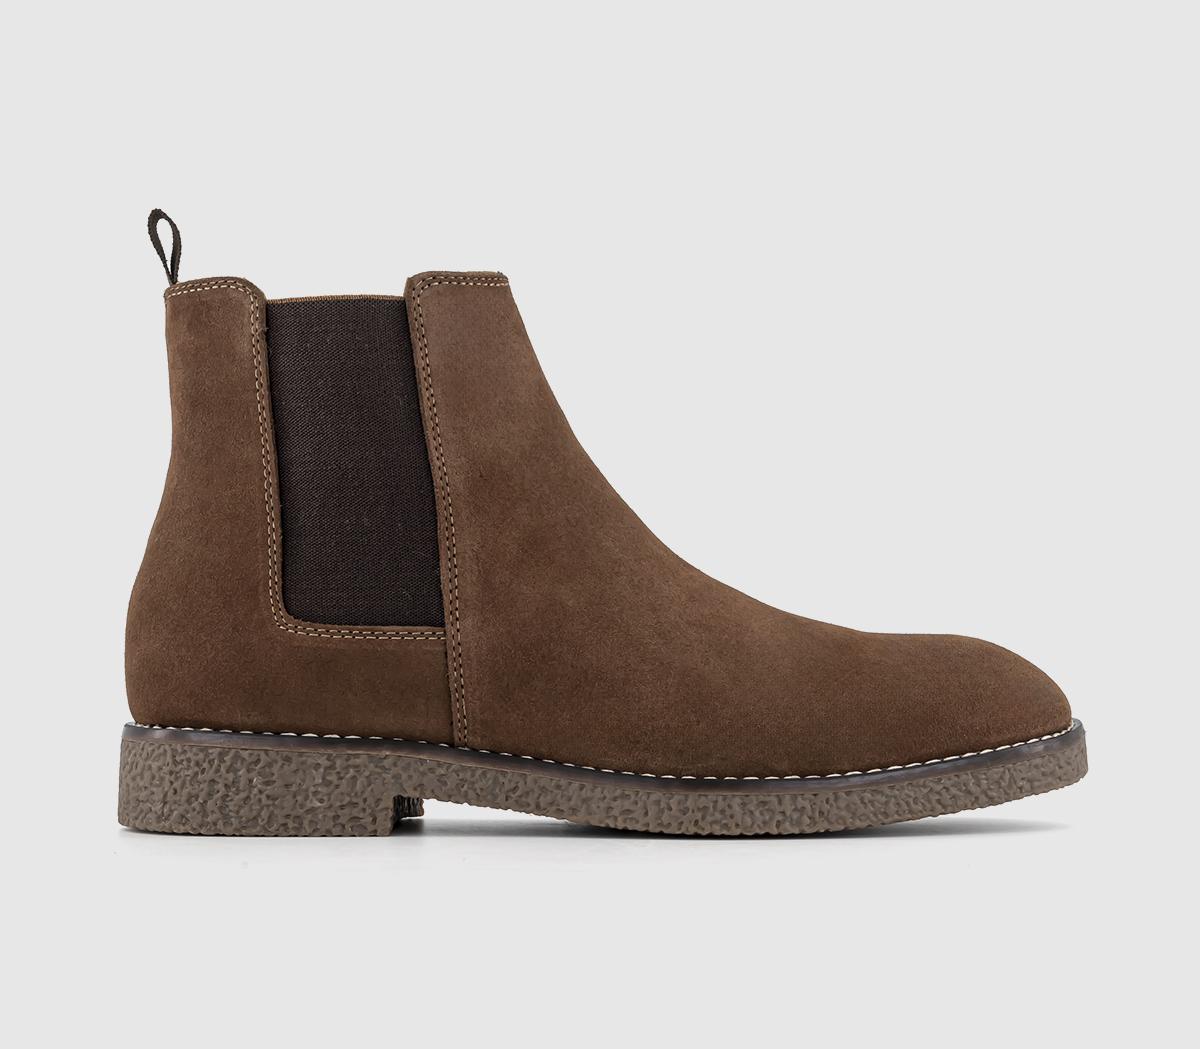 Bachelor Crepe Look Chelsea Boots Brown Suede